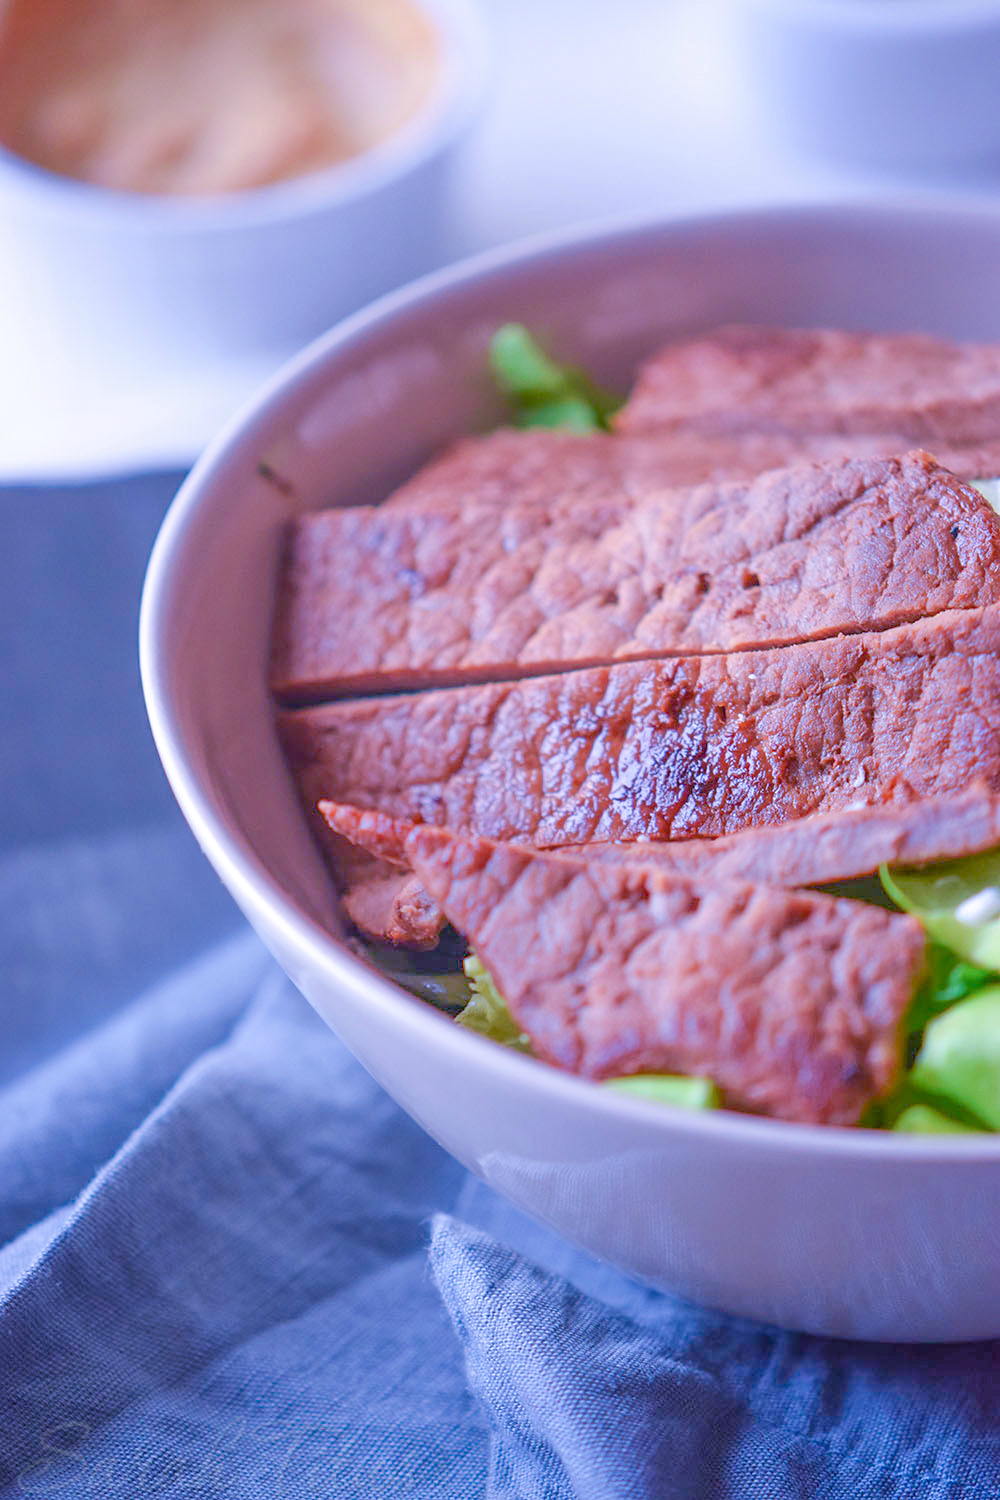 Lettuce, pita and steak in a bowl for the Italian bowl